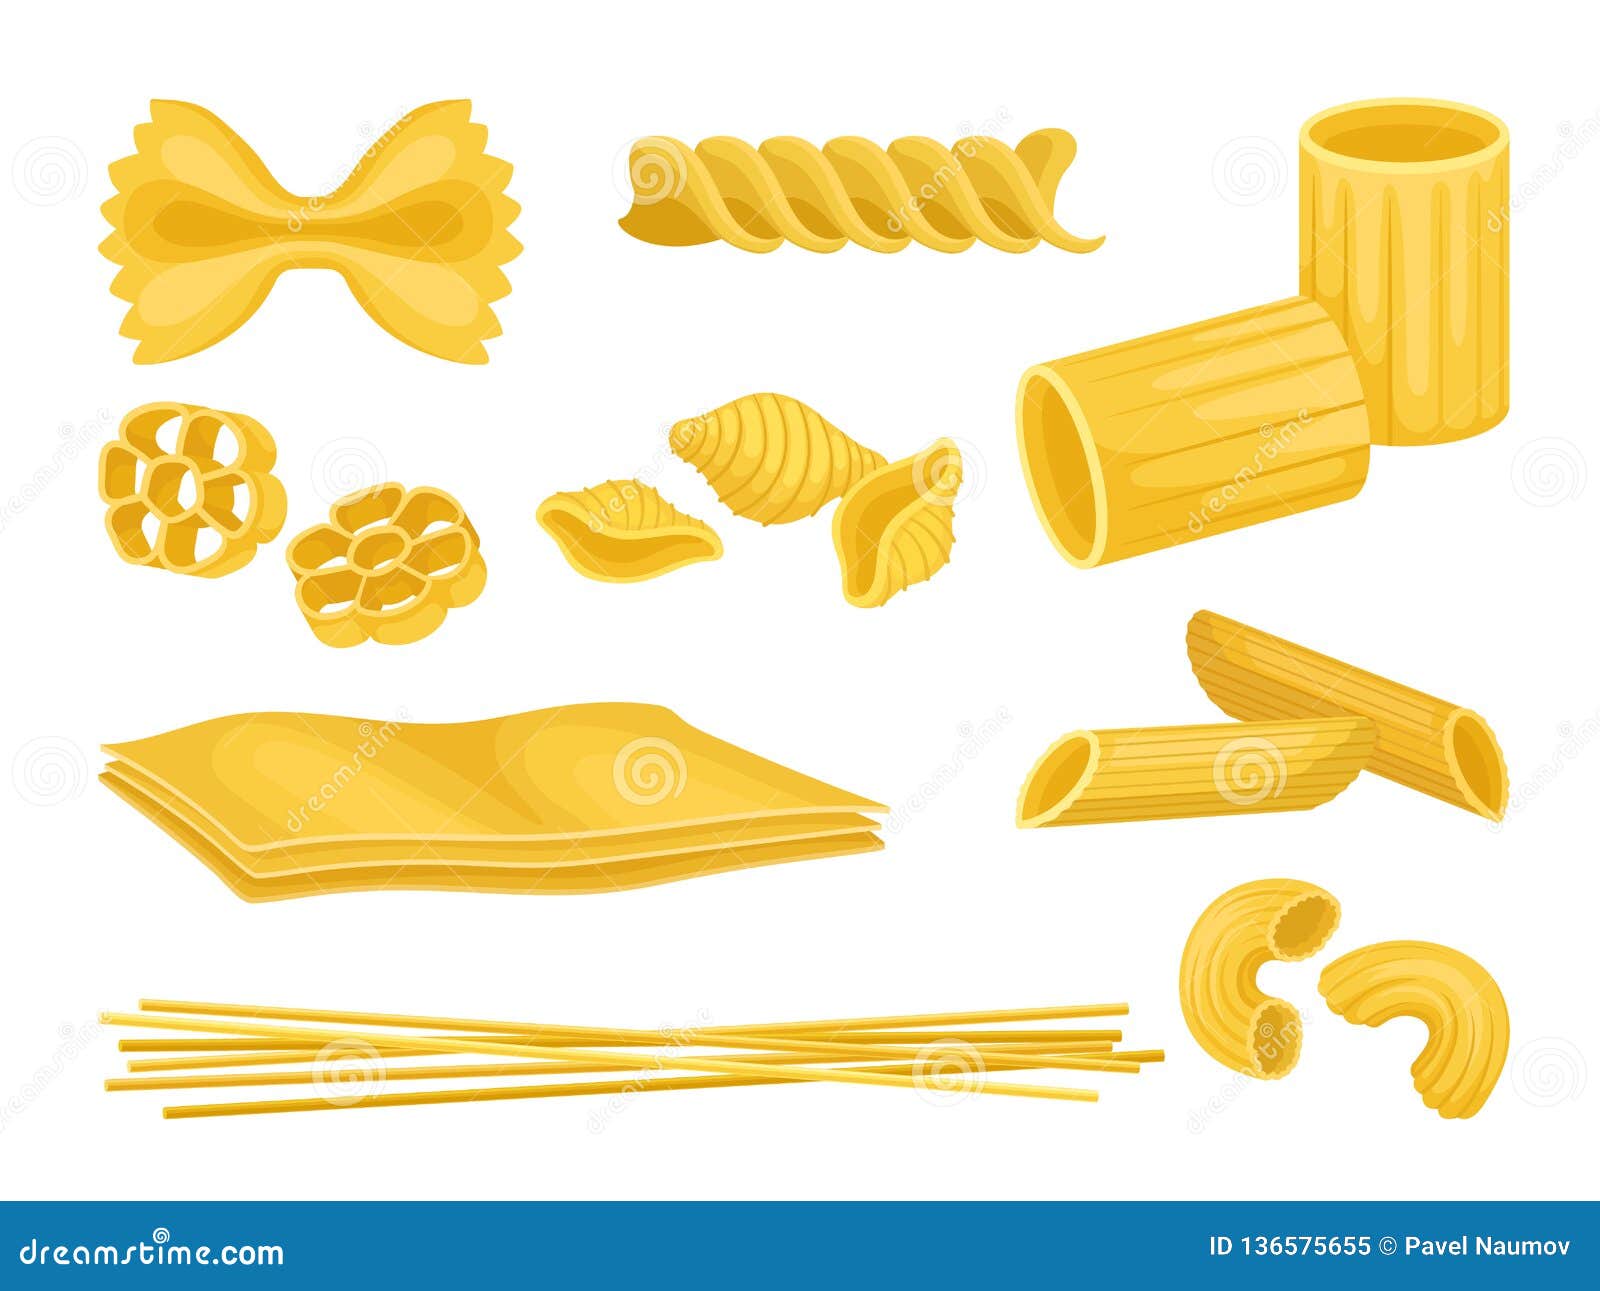 Flat Vector Set of Italian Pasta of Different Shapes. Uncooked Macaroni.  Food Product Stock Vector - Illustration of cartoon, design: 136575655